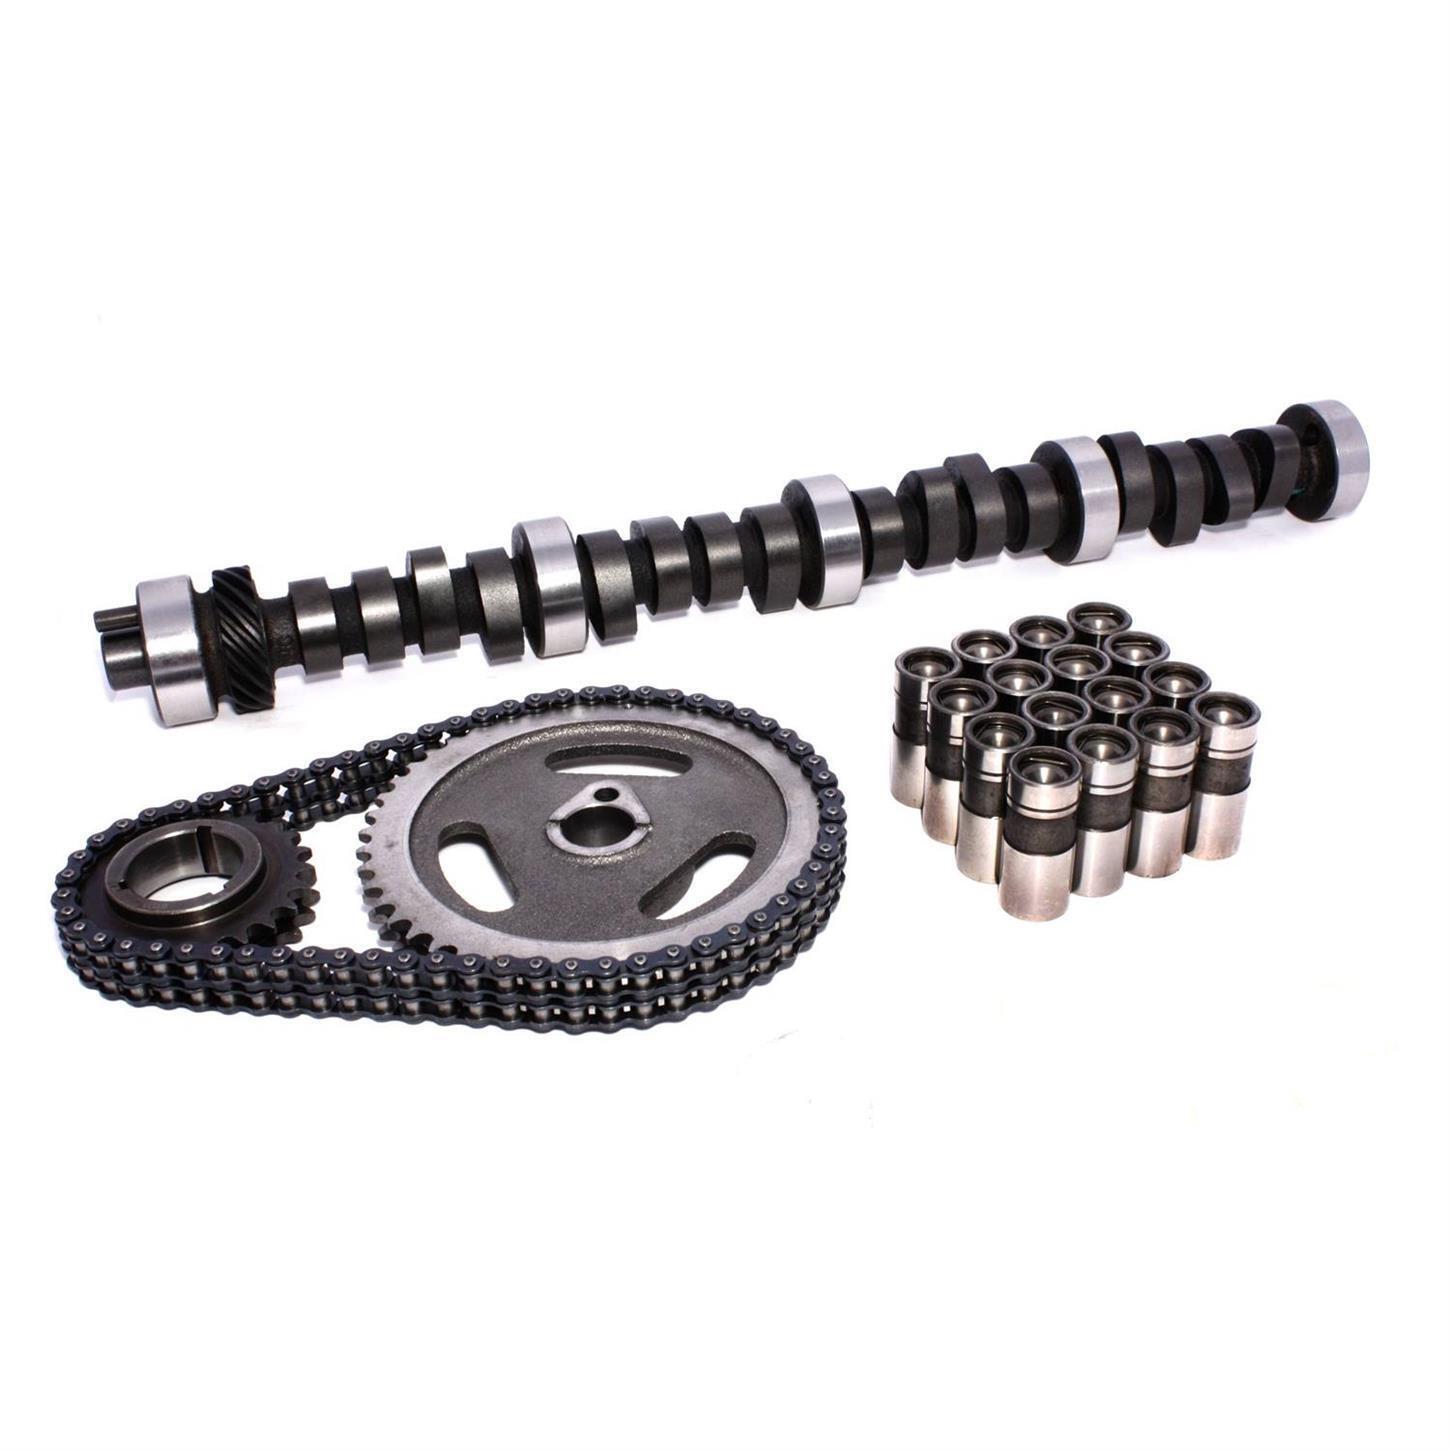 COMP Cams SK32-221-3 Dual Energy Hyd. Camshaft Kit, Fits Ford 351C/351M/400